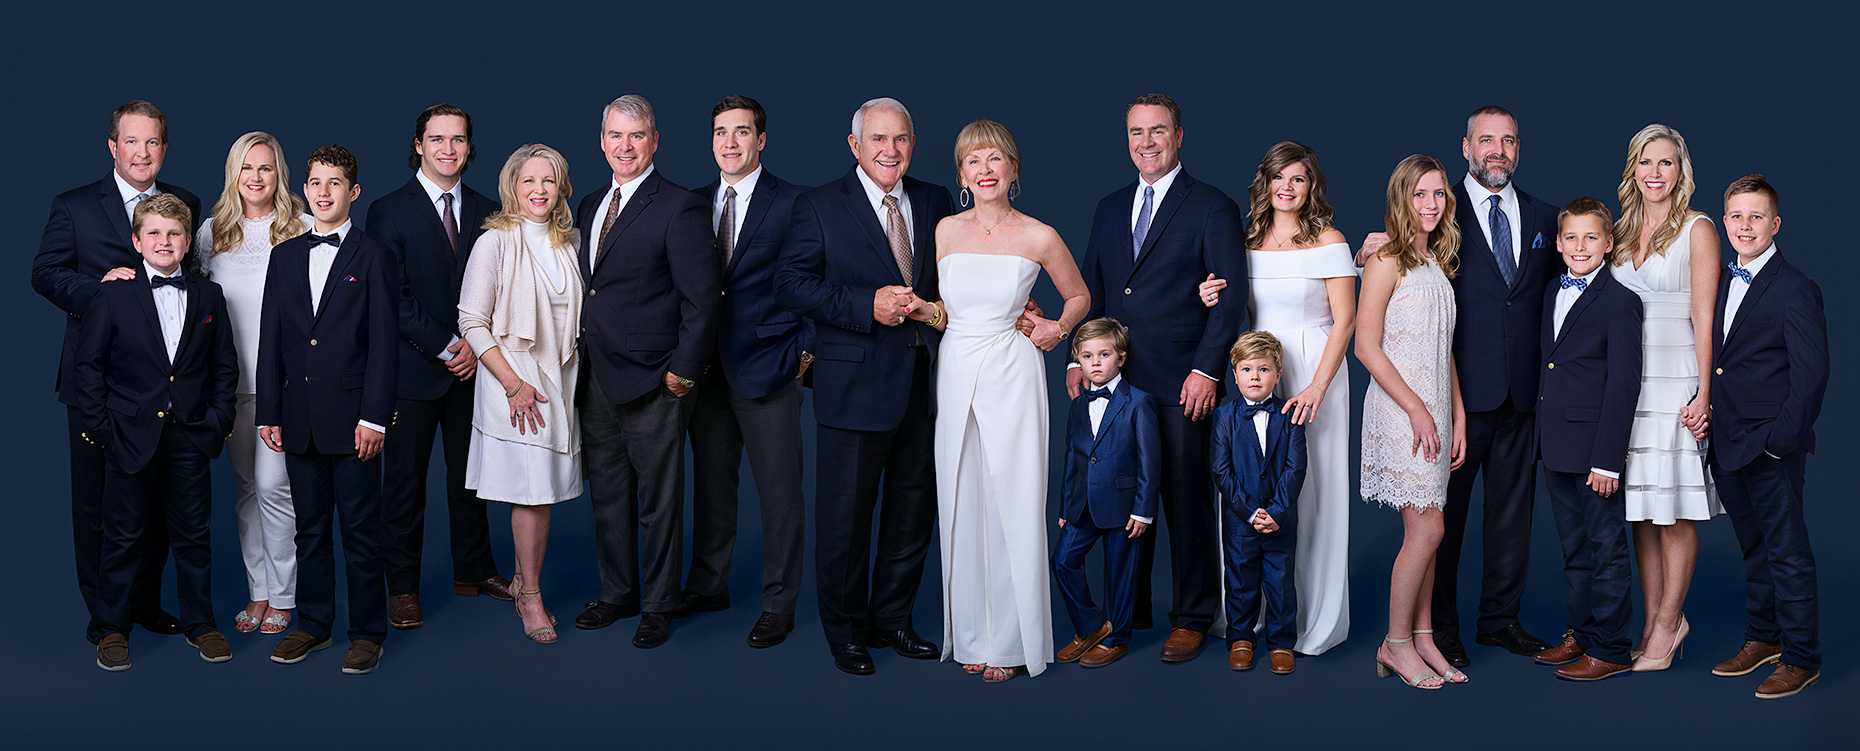 Extended family portrait of the Gilbert grand parents with their children and grand children in the studio in Dallas, Texas by photographer John Derryberry Photography